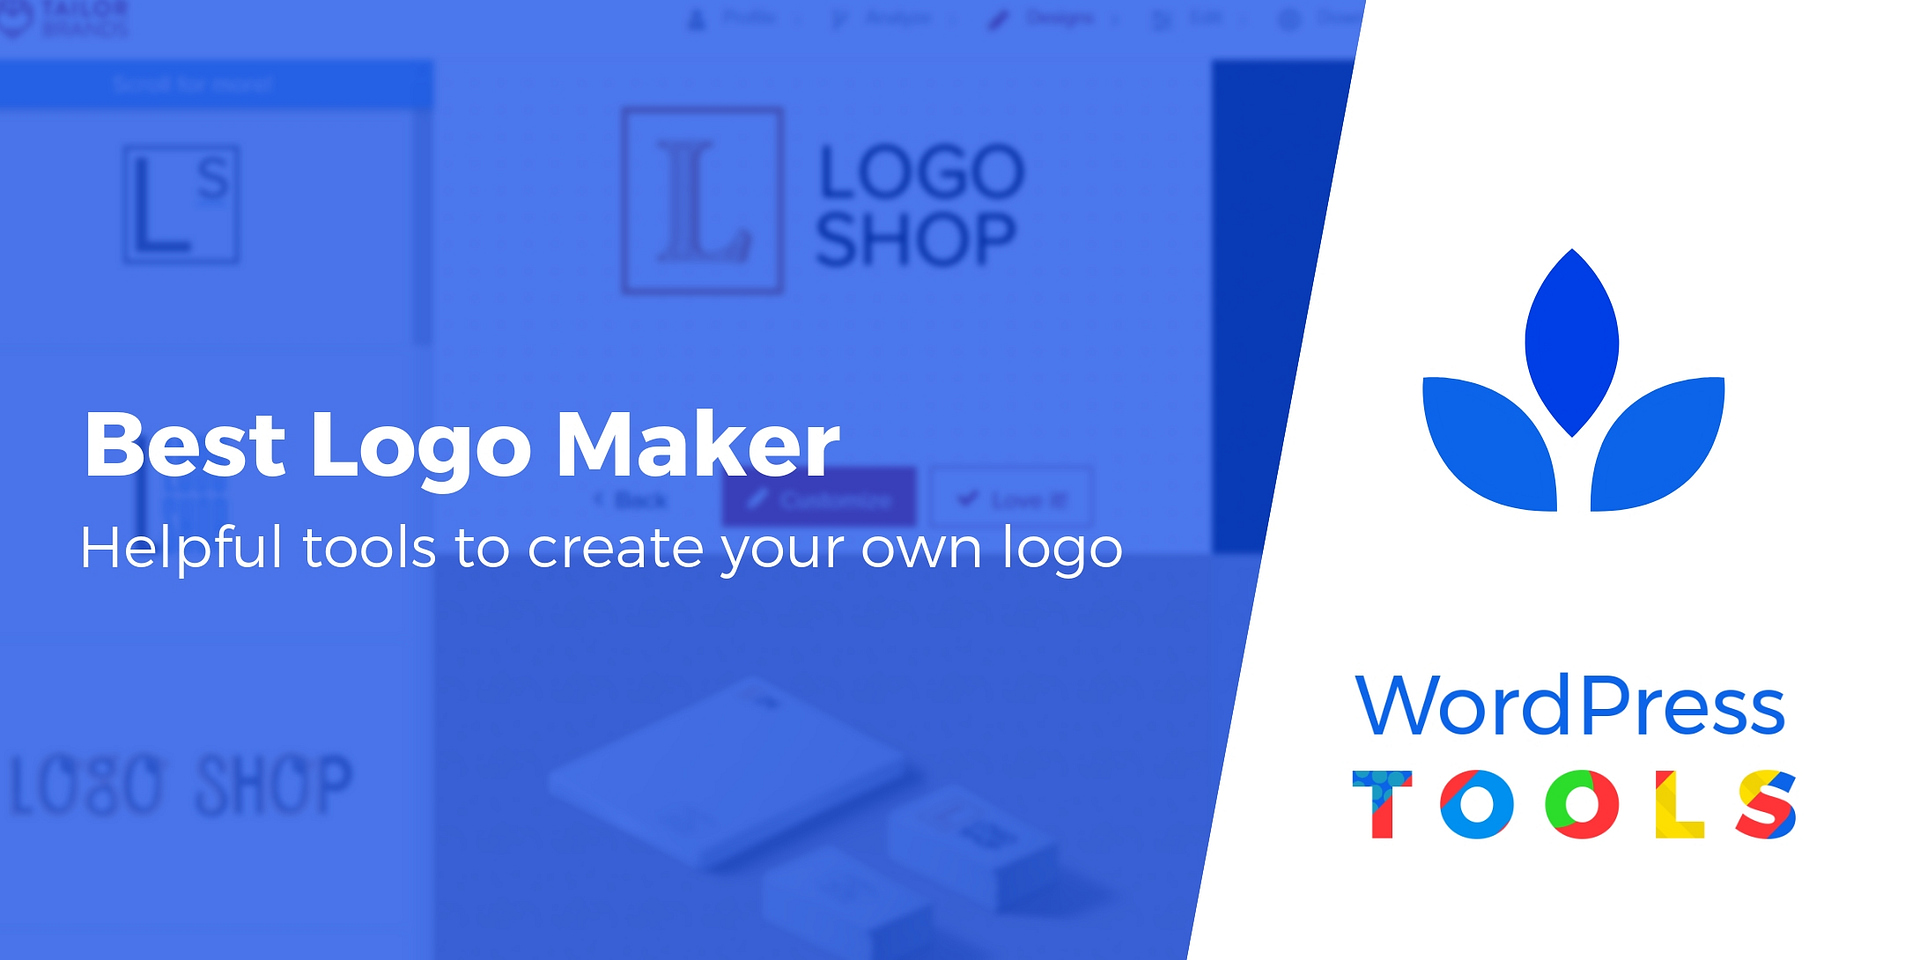 Best Logo Maker 10 Great Tools Compared For 2020 - roblox avatar logo generator